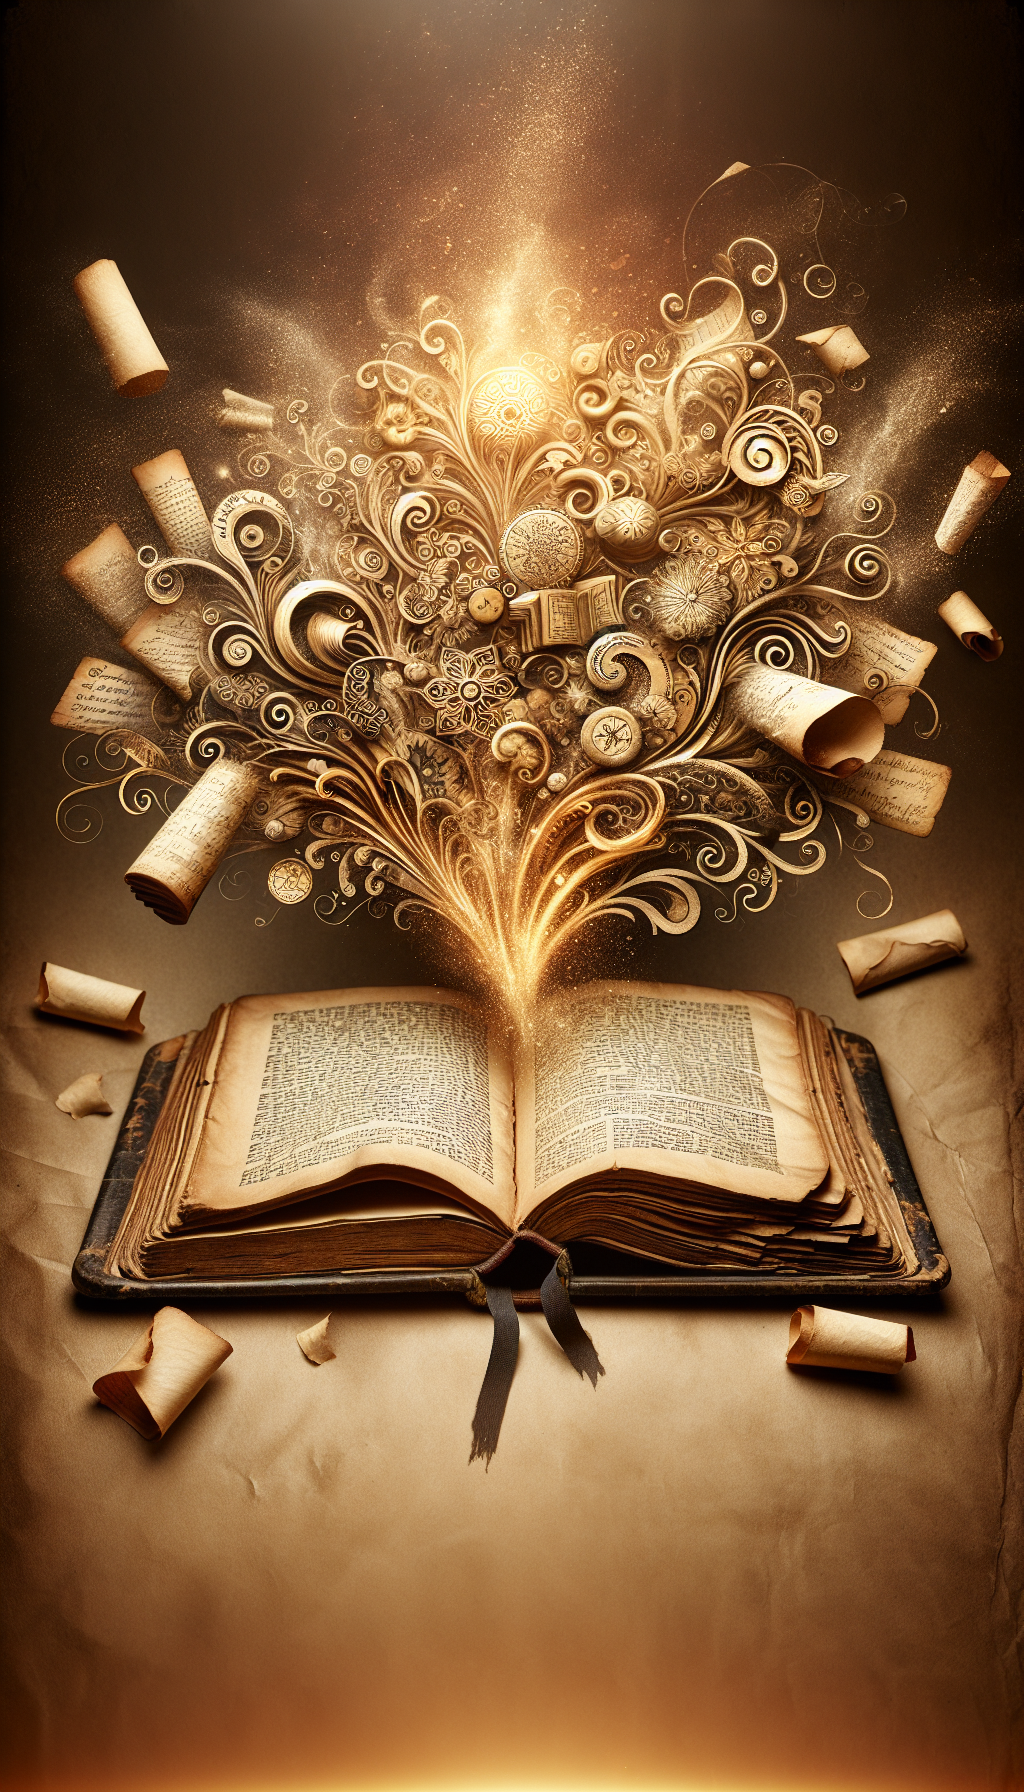 An open, antique book with a whimsical cloud of dust above it, which transforms into intricate, gilded shapes that represent classic literary symbols. The pages themselves glimmer with faint script and emit a soft, golden glow, suggesting the timeless value and wisdom contained within the worn covers. Around it, wisps of page corners curl like scrolls, merging past and present.